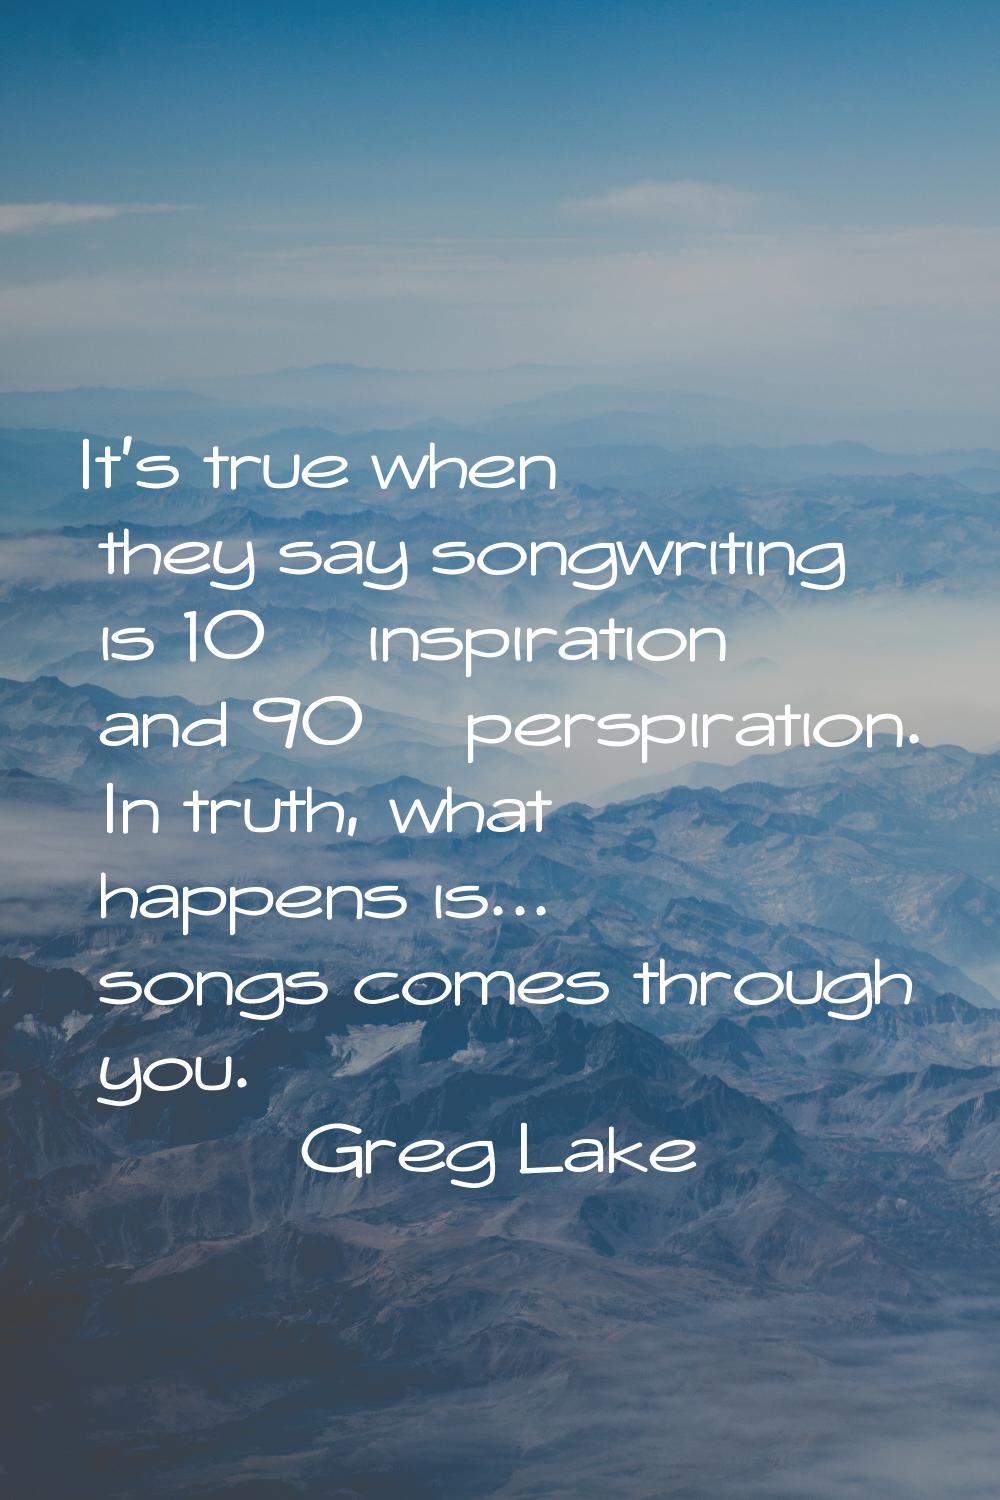 It's true when they say songwriting is 10% inspiration and 90% perspiration. In truth, what happens